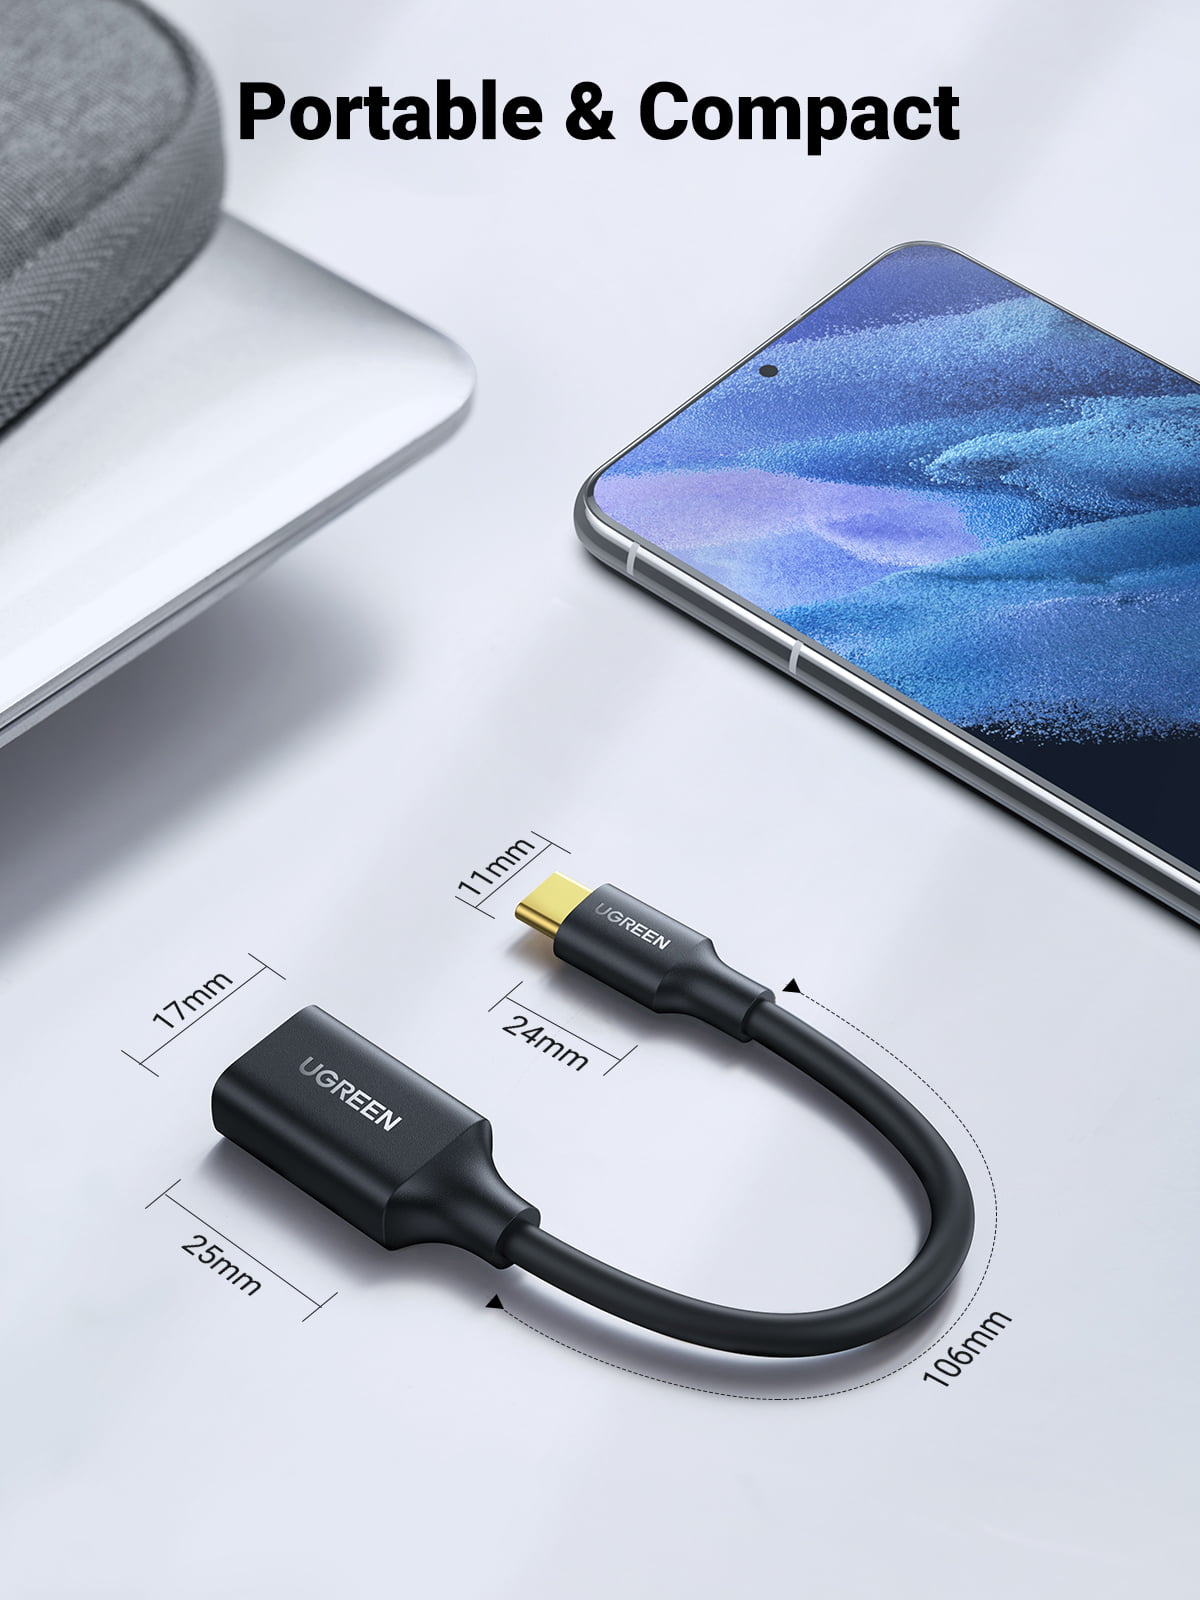 UGREEN USB C to USB Adapter Type C OTG Cable USB C Male to USB 3.0 A Female  Cable Connector Compatible for MacBook Pro 2019 2018 Samsung Galaxy S10 S9